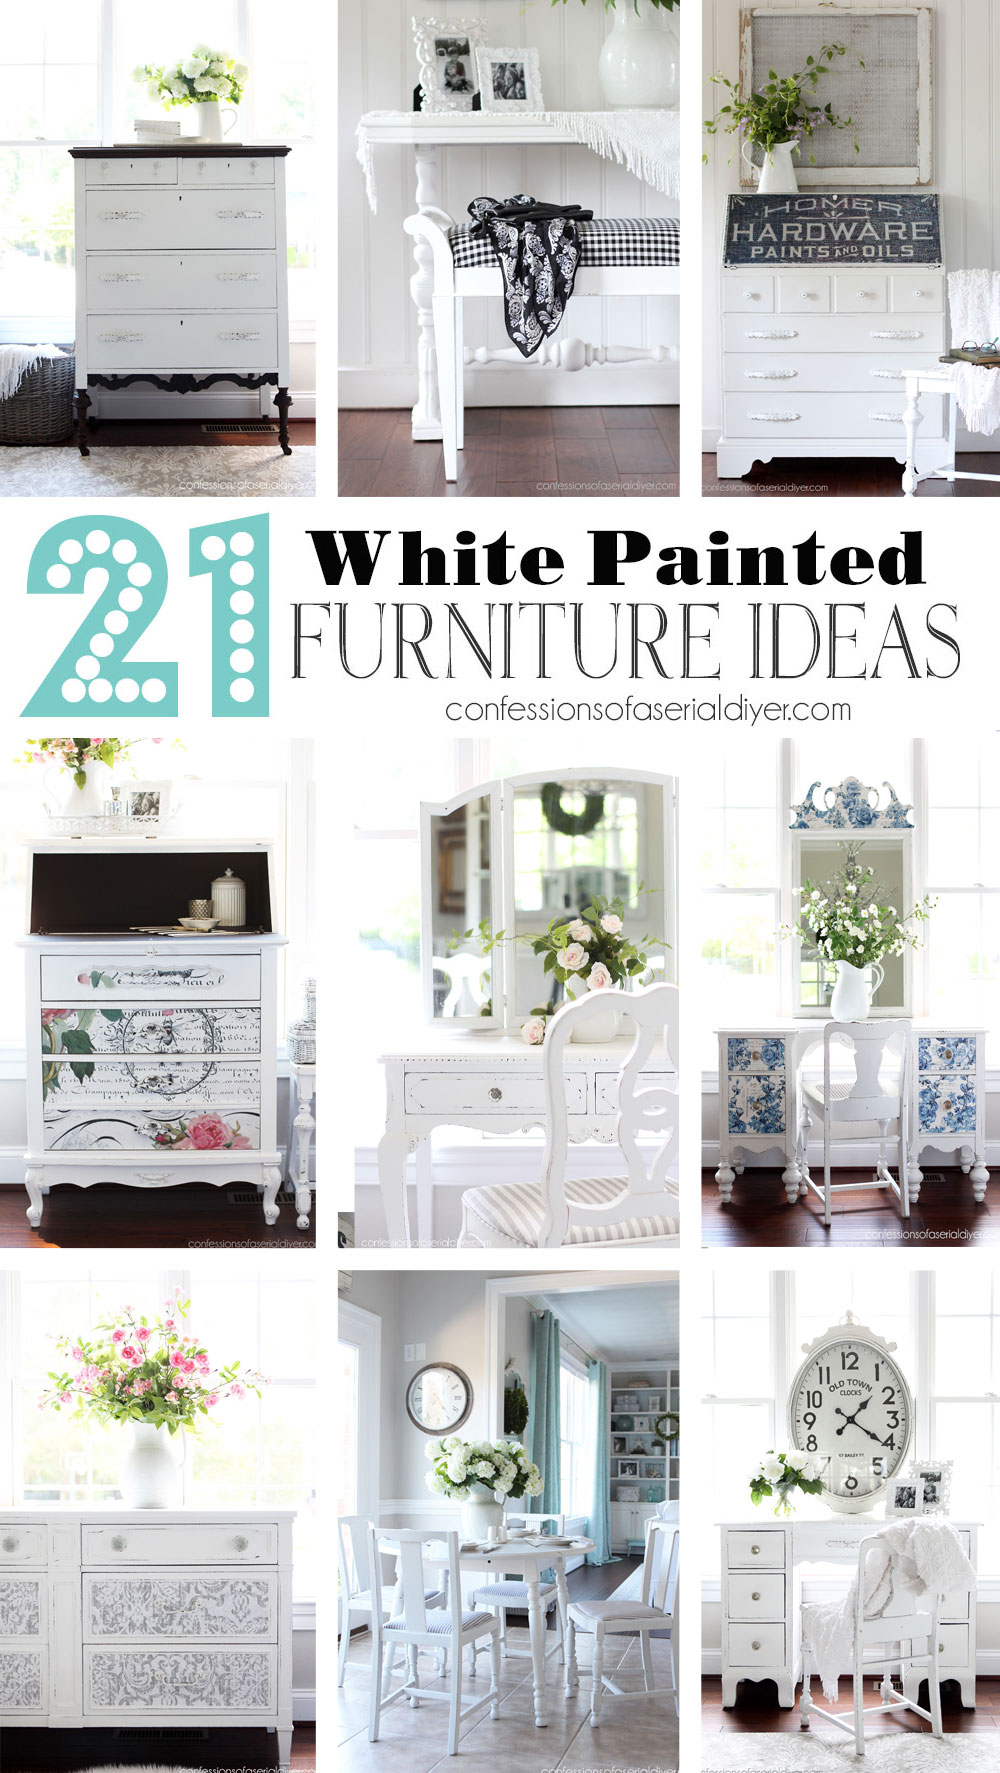 White Painted Furniture Ideas